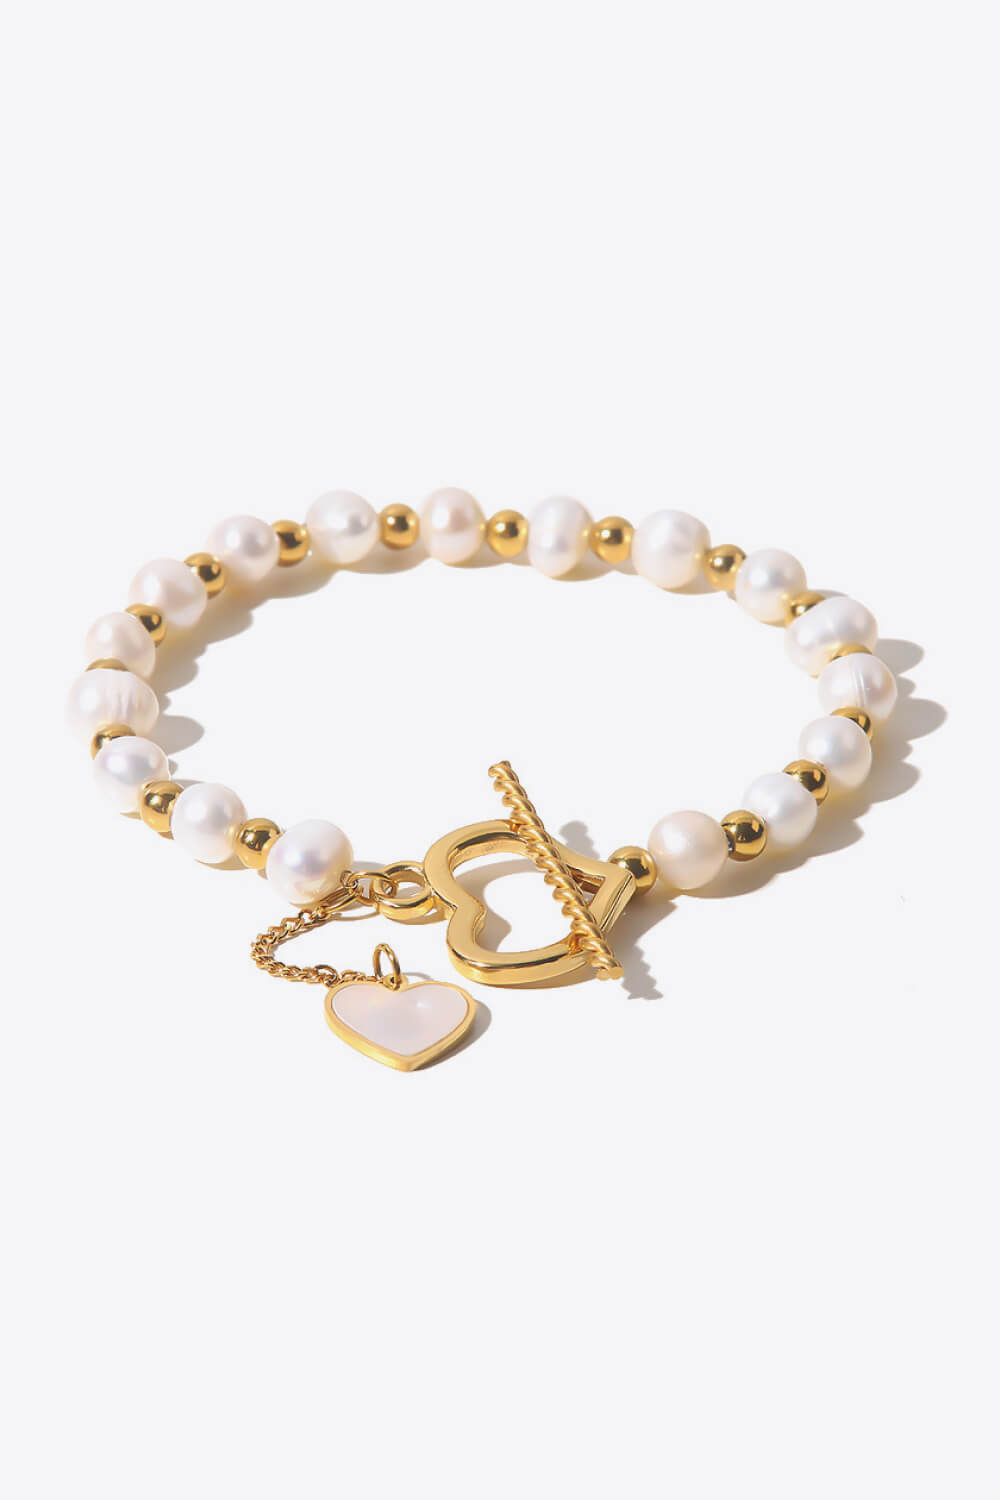 Freshwater Pearl Heart Charm Bracelet - Tophatter Deals and Online Shopping - Electronics, Jewelry, Beauty, Health, Gadgets, Fashion - Tophatter's Discounts & Offers - tophatters - tophatters.co